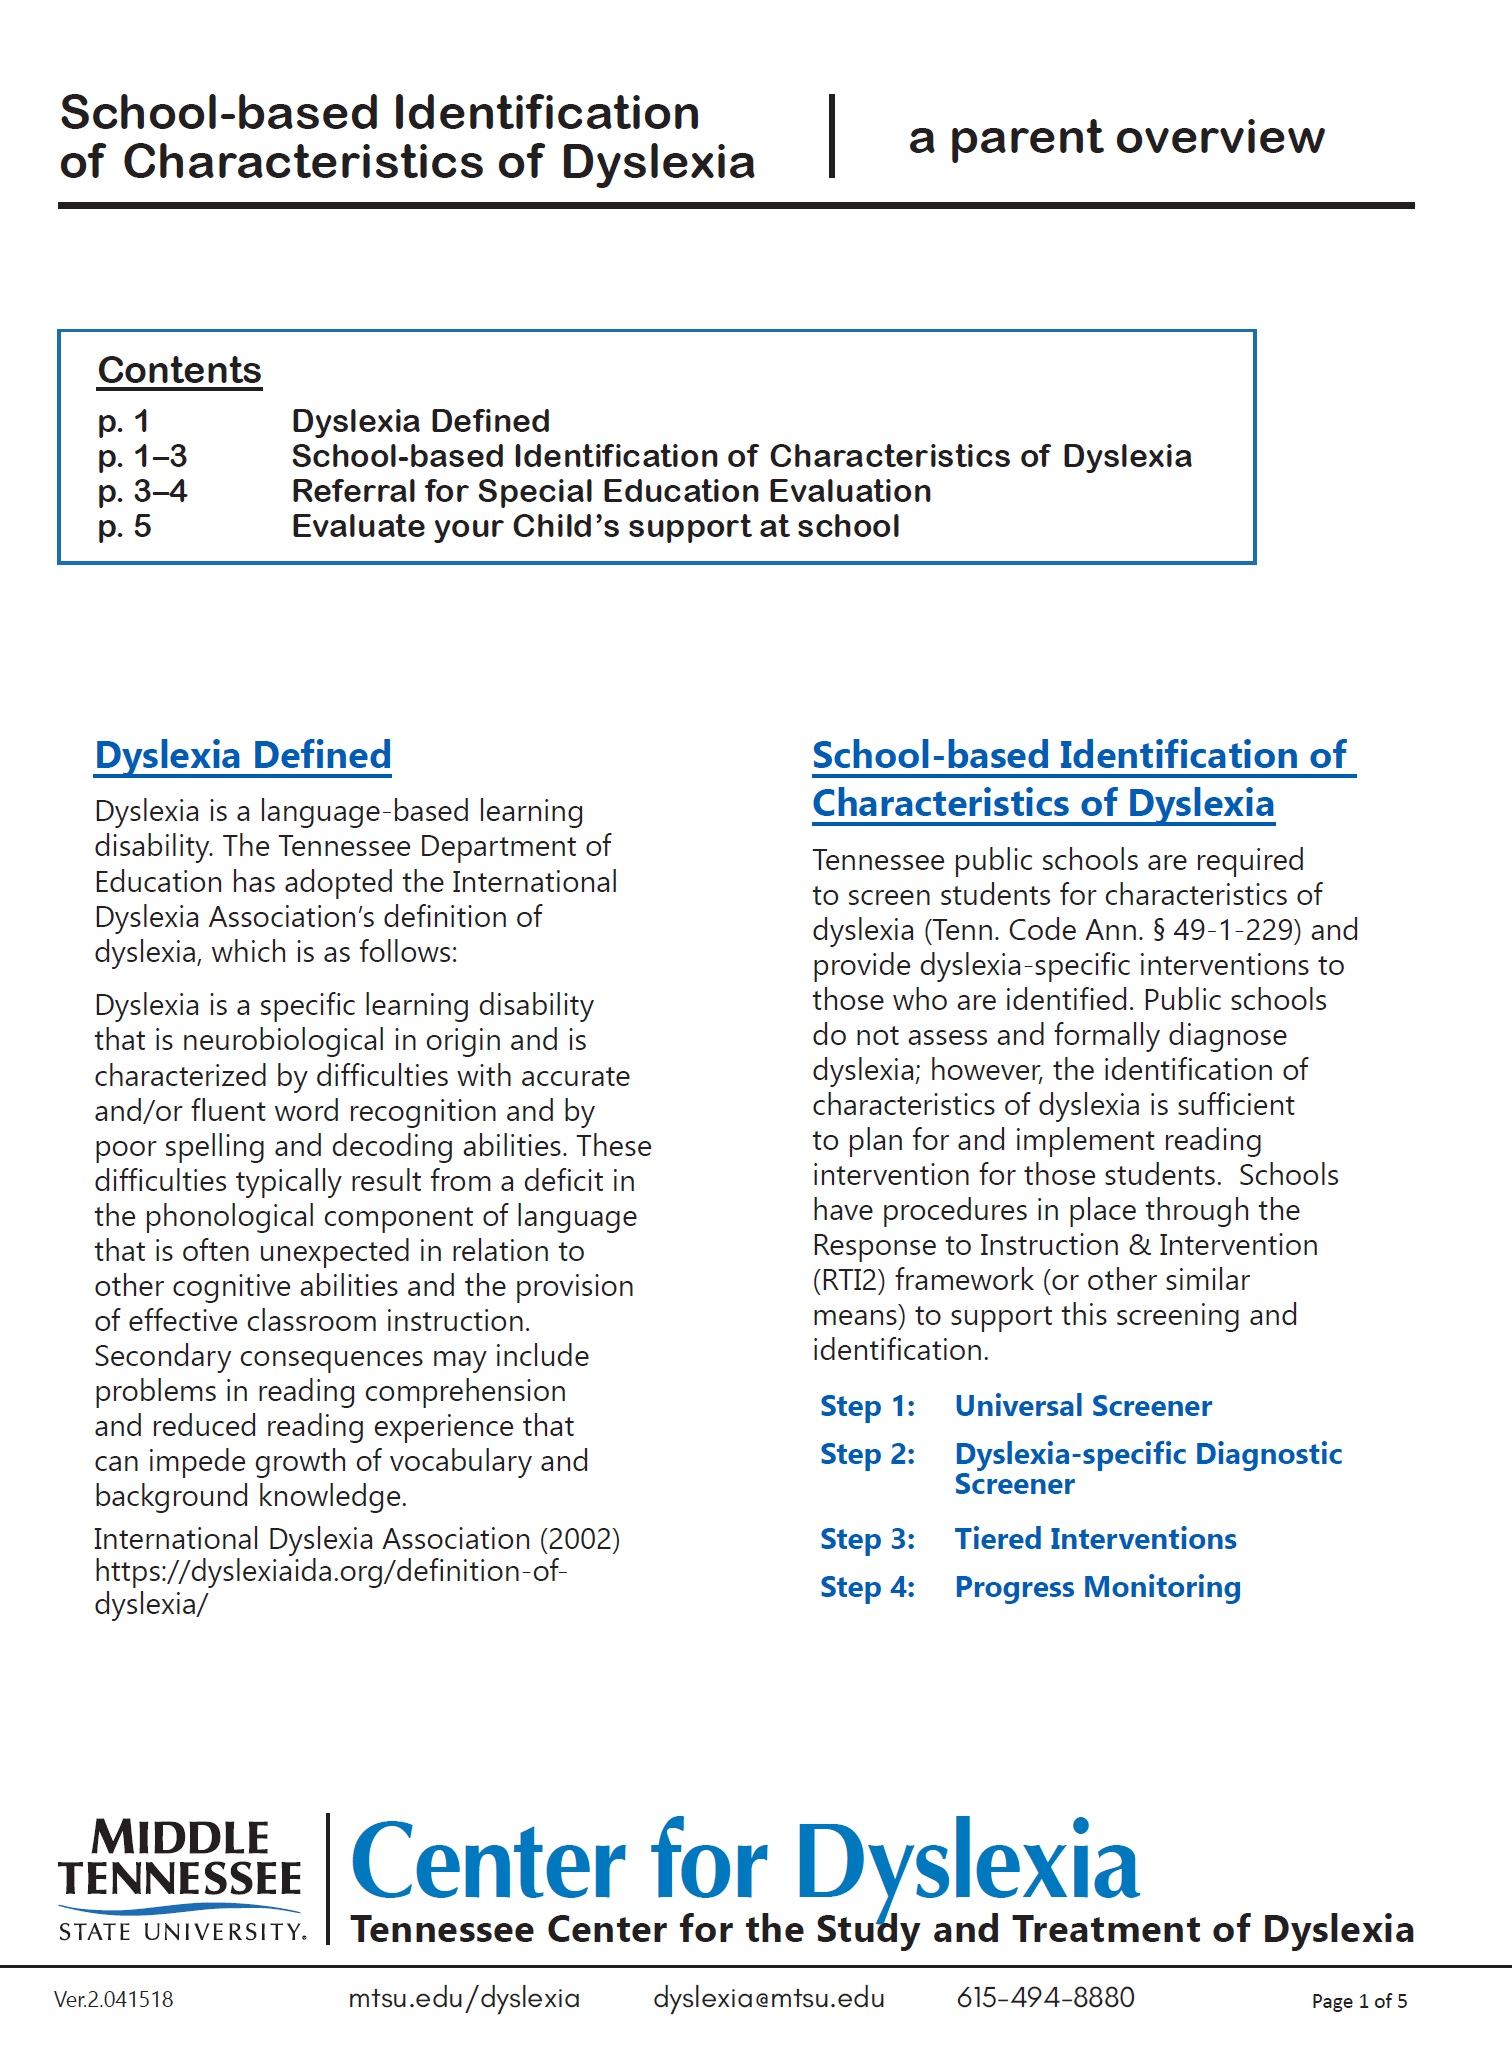 Parent Overview of School-based Identification of Characteristics of Dyslexia Cover Image